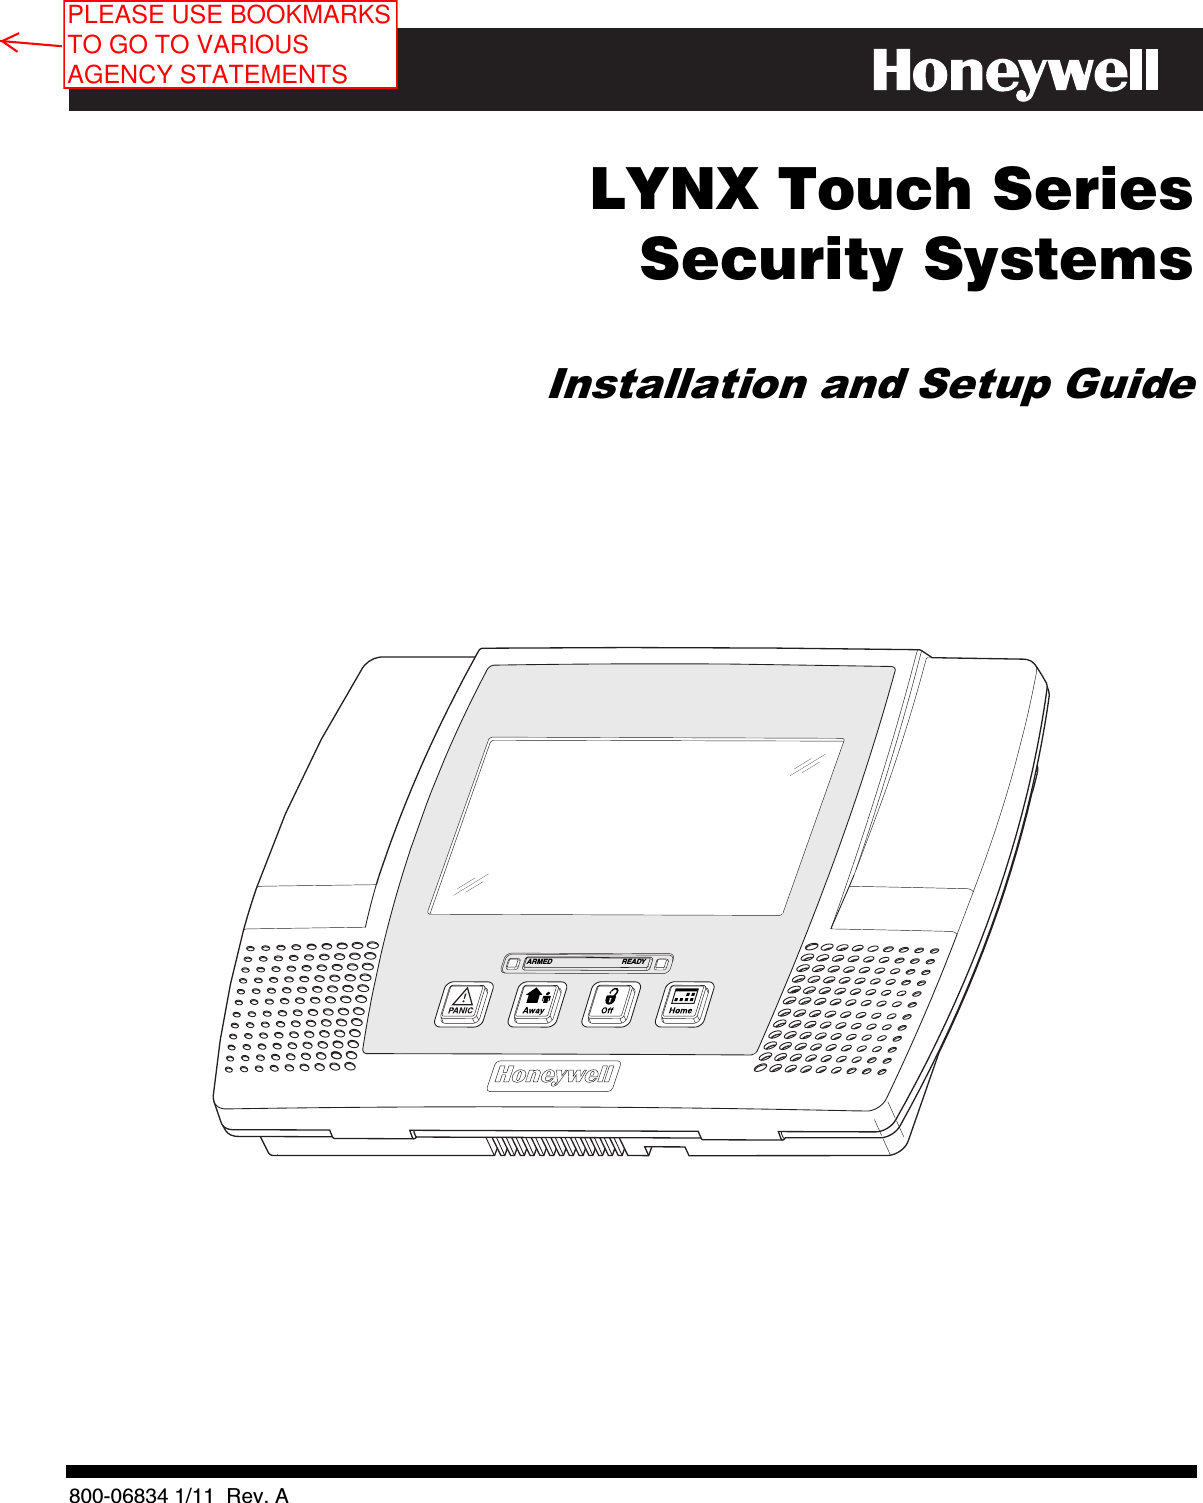     LYNX Touch Series   Security Systems  Installation and Setup Guide     ARMED READY          800-06834 1/11  Rev. APLEASE USE BOOKMARKS TO GO TO VARIOUS AGENCY STATEMENTS